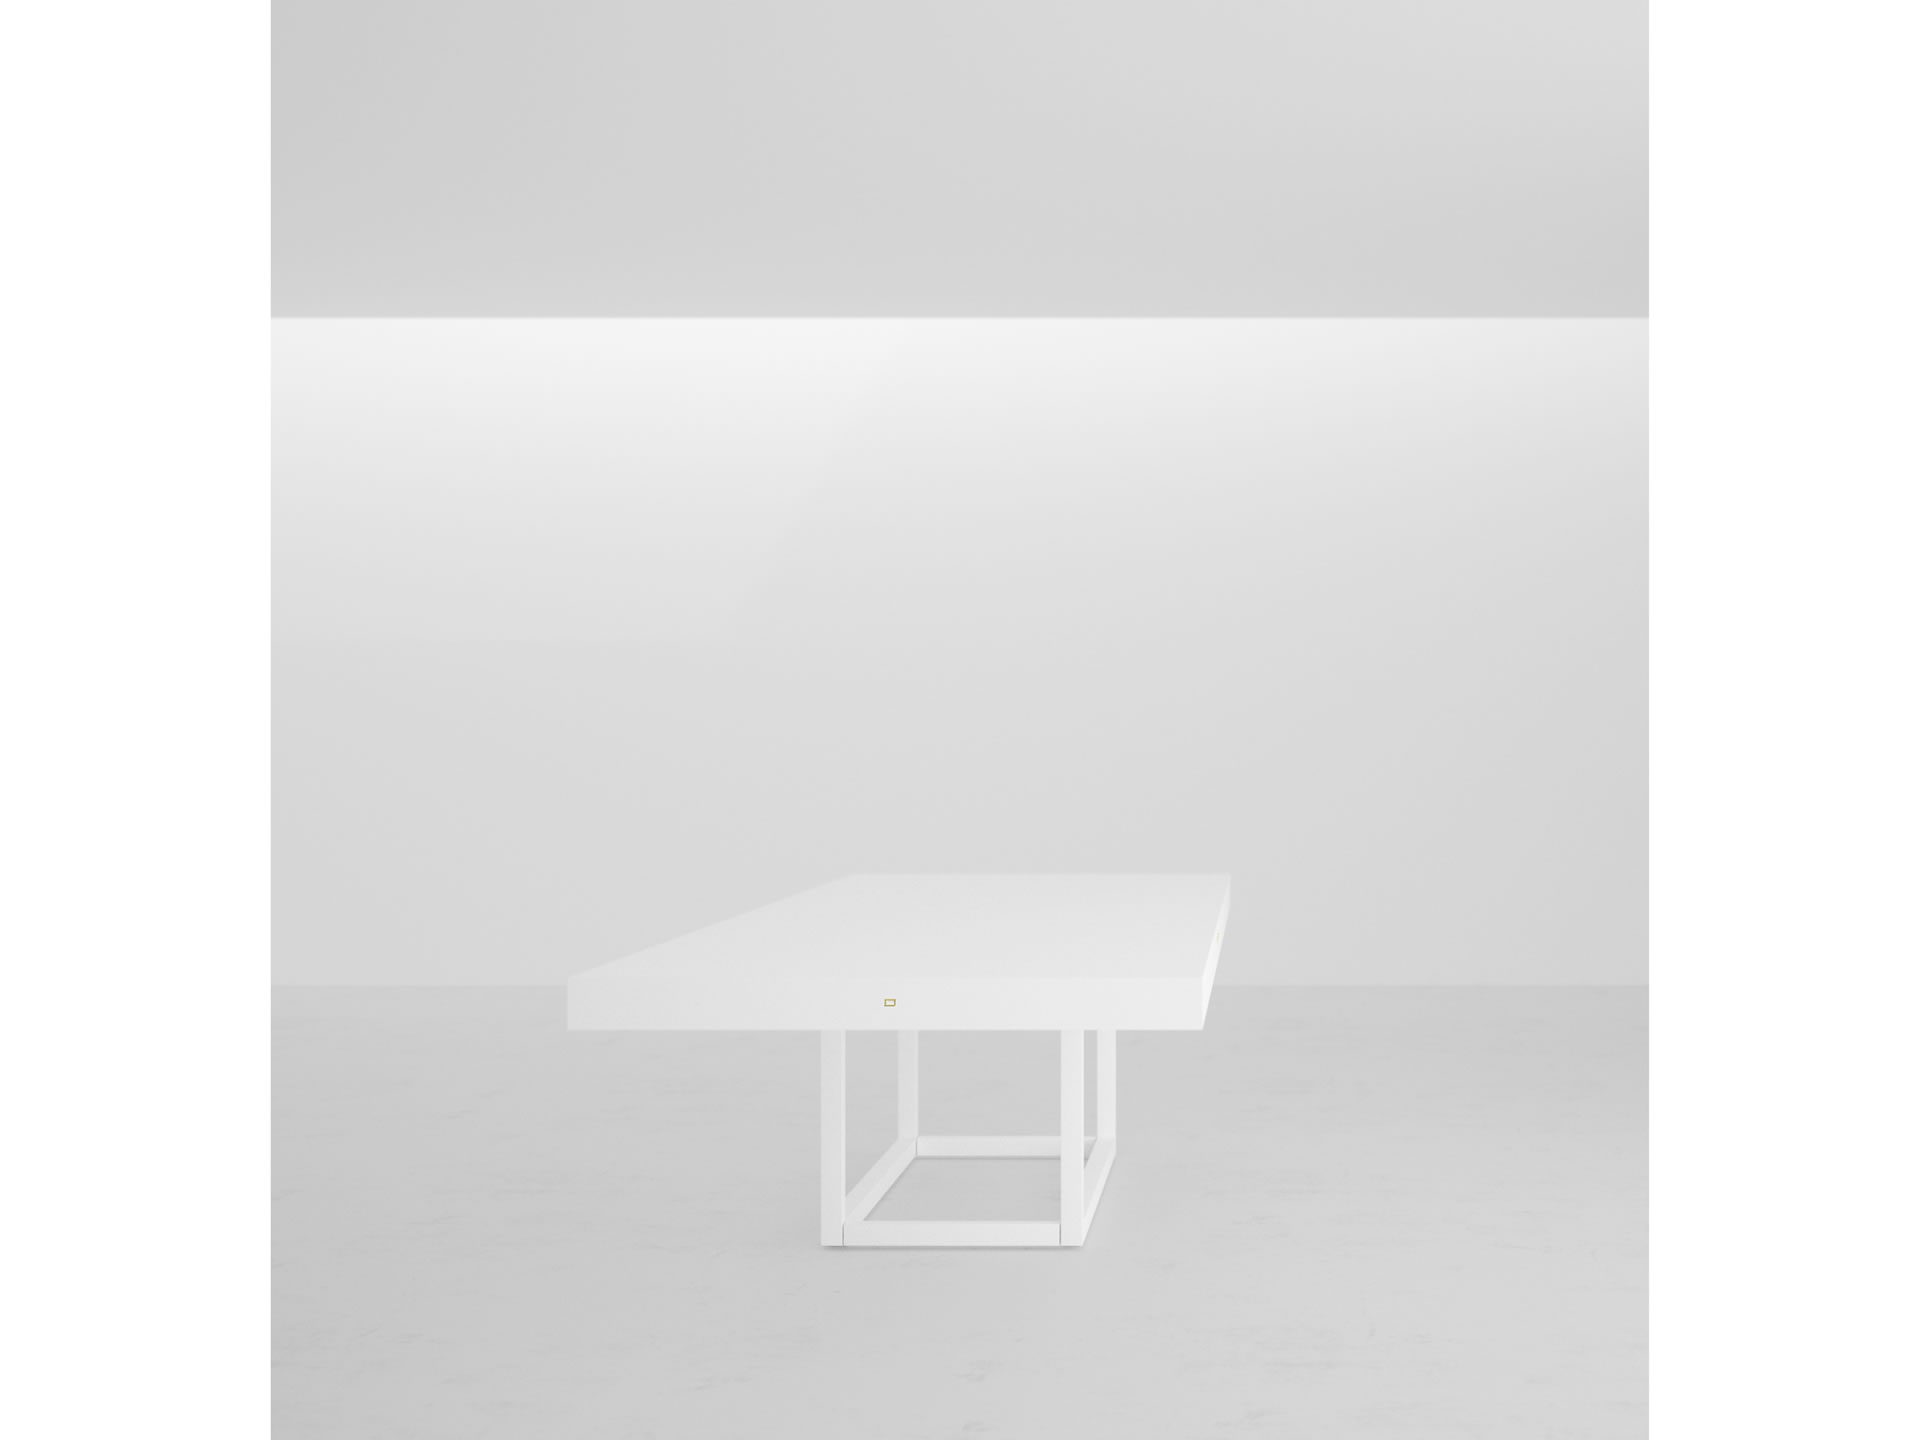 RECHTECK CONFERENCE TABLE II III Cultivate White Large Conference Table Grid Base